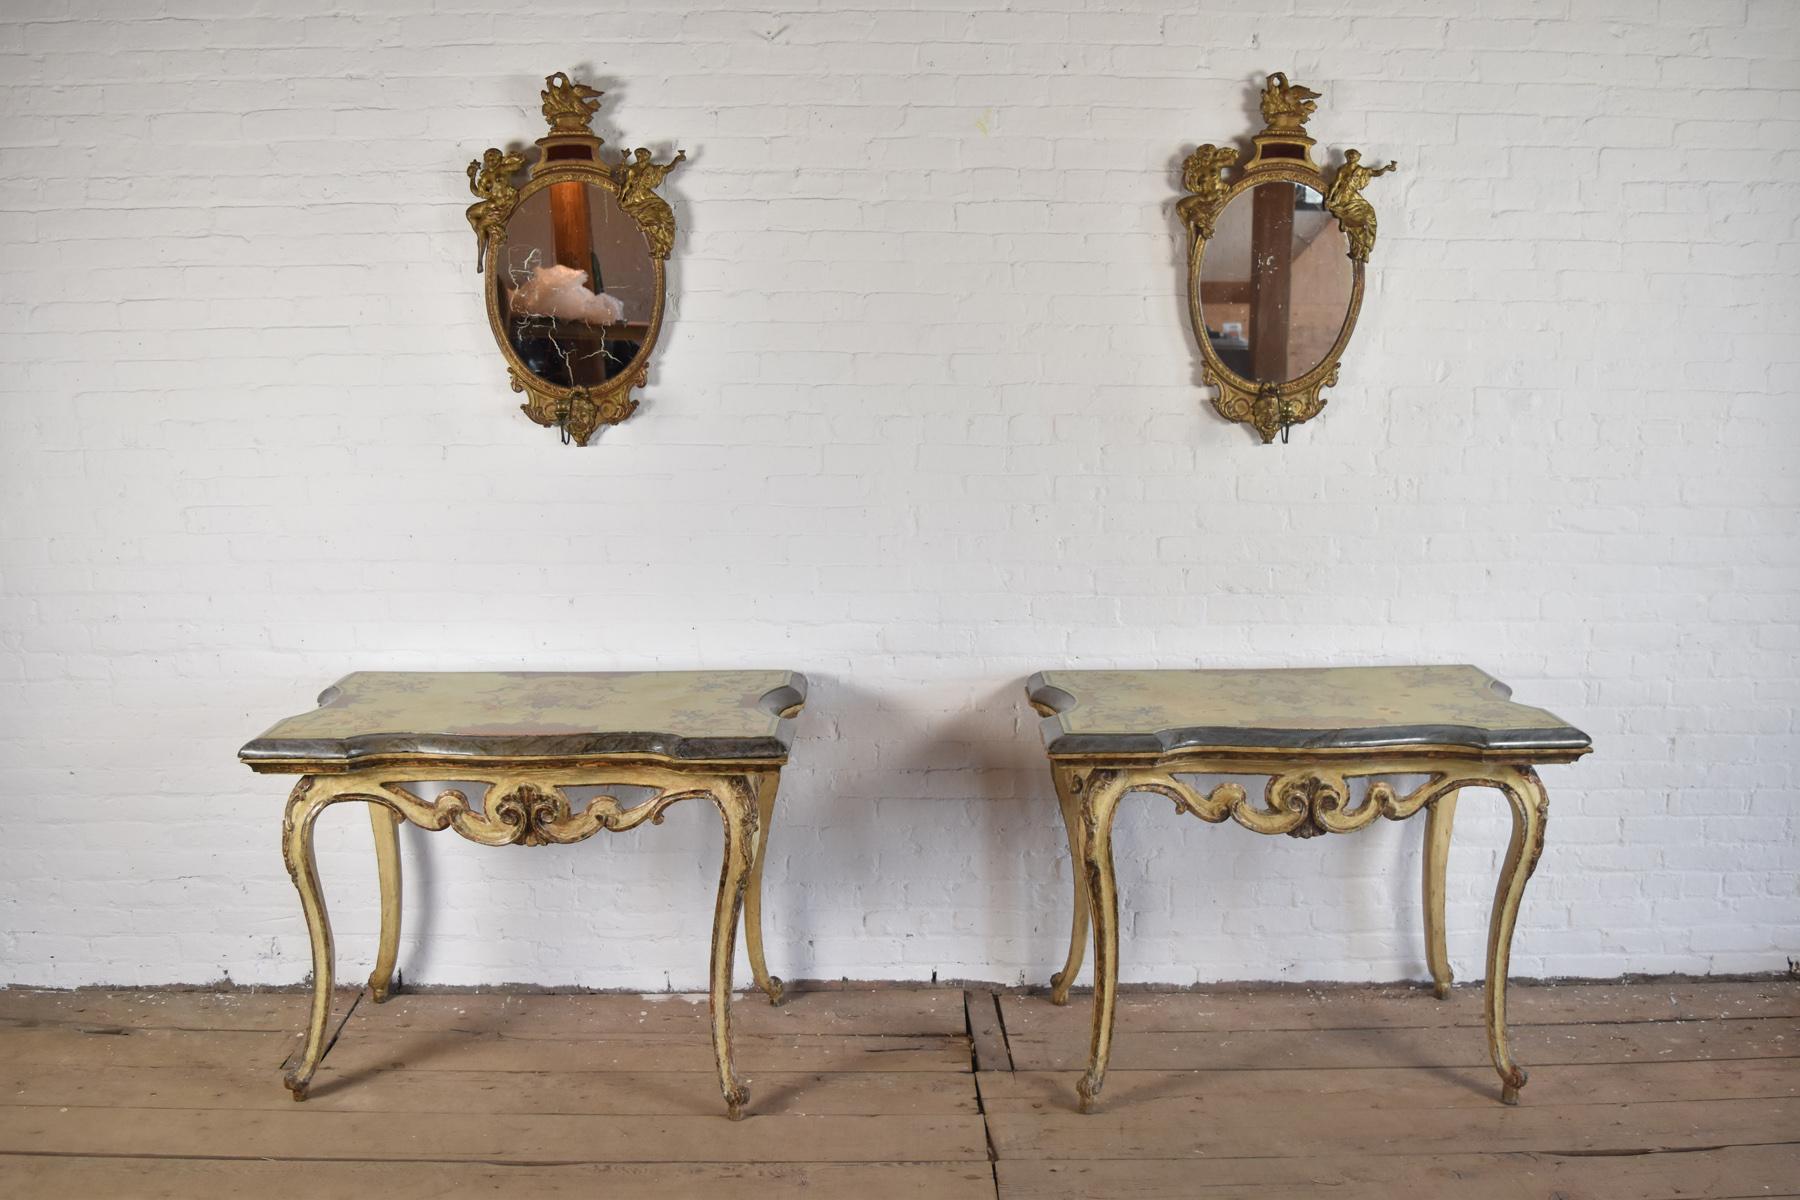 Pair of 18th Century Italian Rococo Painted Console Tables with Scagliola Tops In Good Condition For Sale In Troy, NY